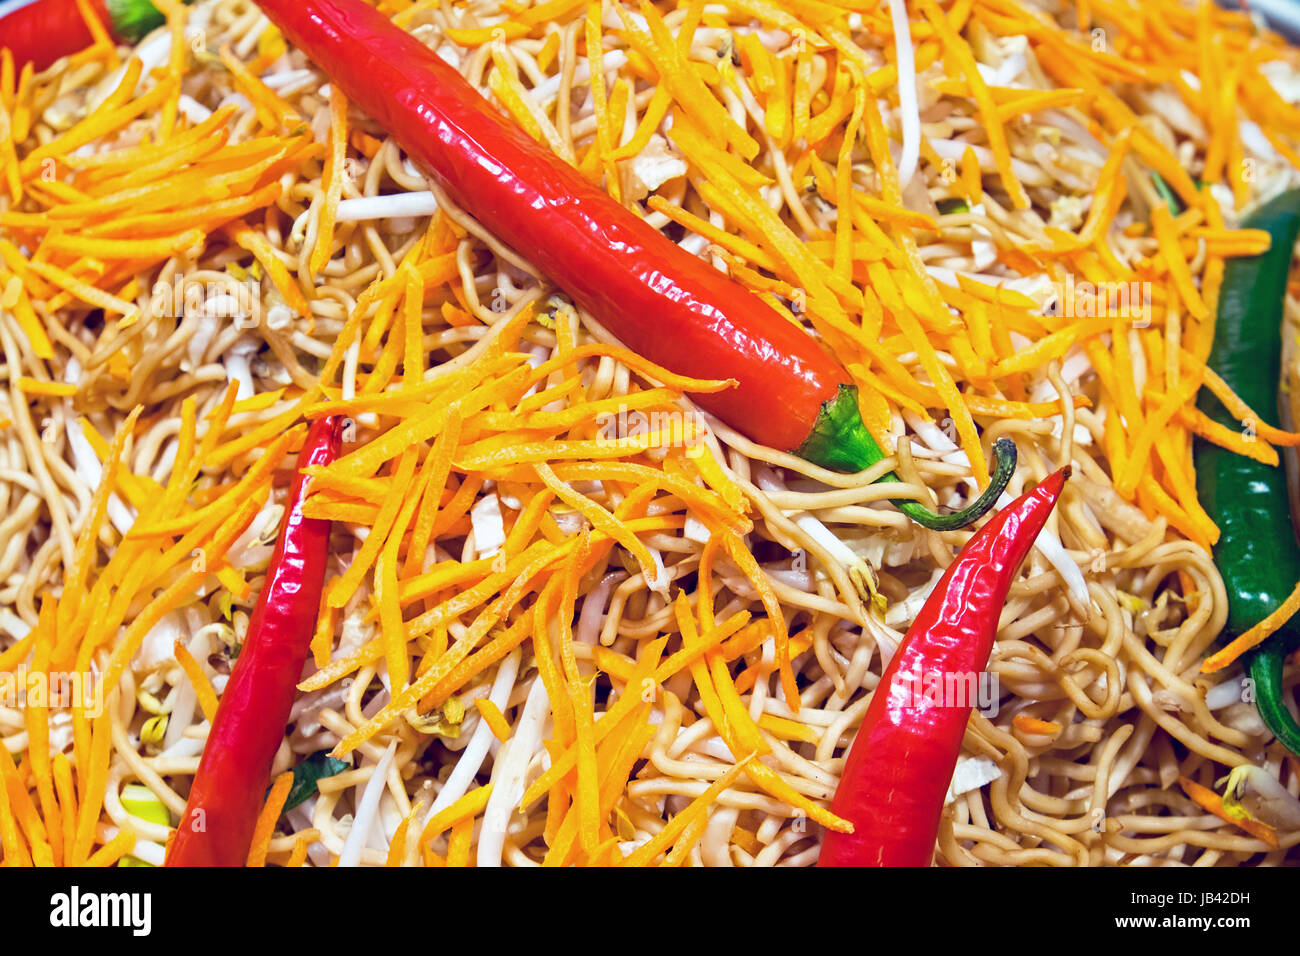 red hot peppers with thai food Stock Photo